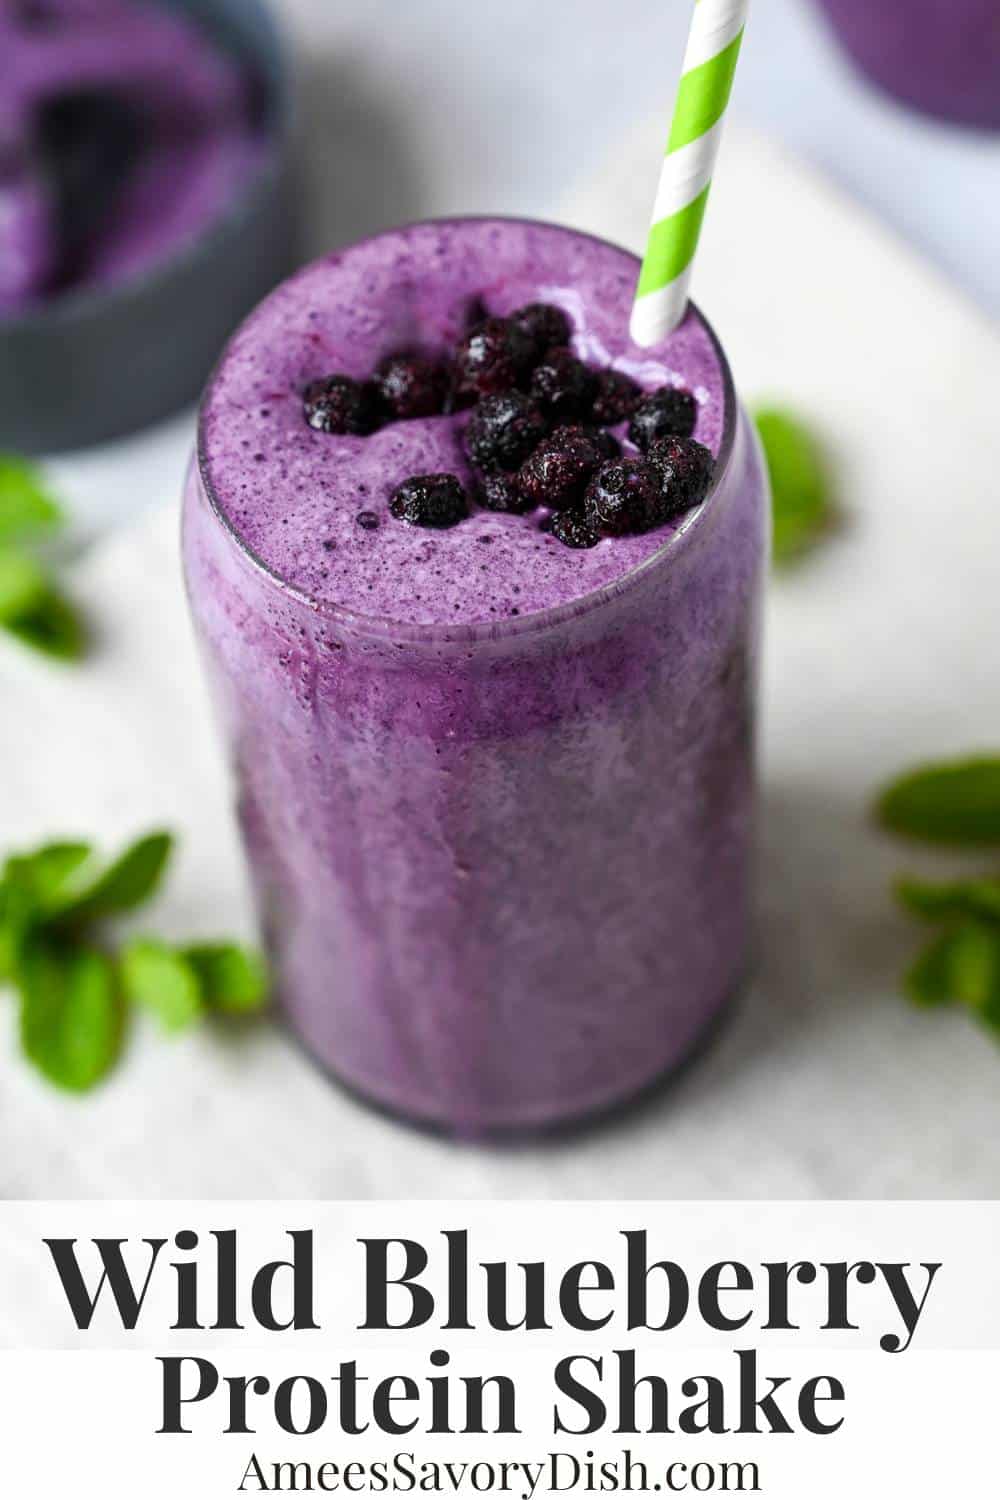 This Wild Blueberry Protein Shake is a quick and delicious protein shake recipe made with wild frozen blueberries, protein powder, flaxseed, and nut milk. via @Ameessavorydish